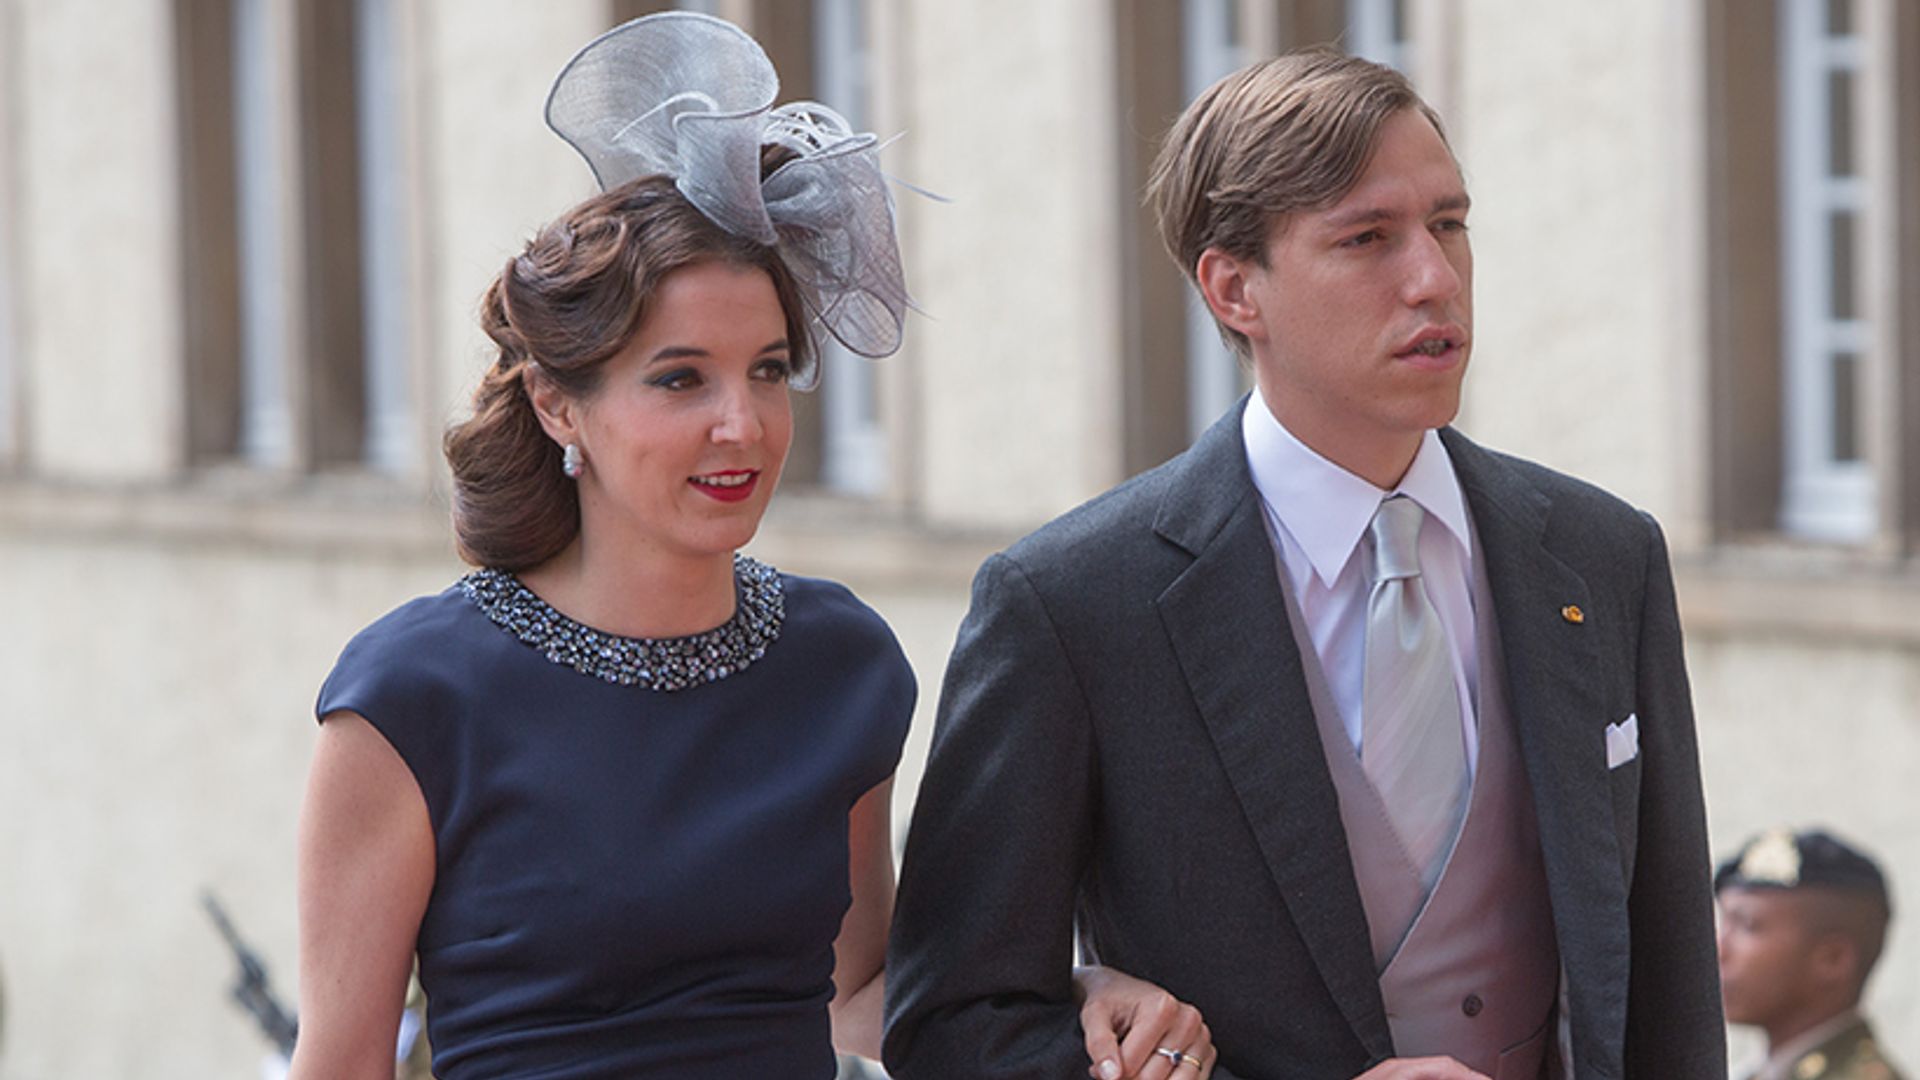 Princess Tessy of Luxembourg represents herself in court during Prince Louis divorce battle